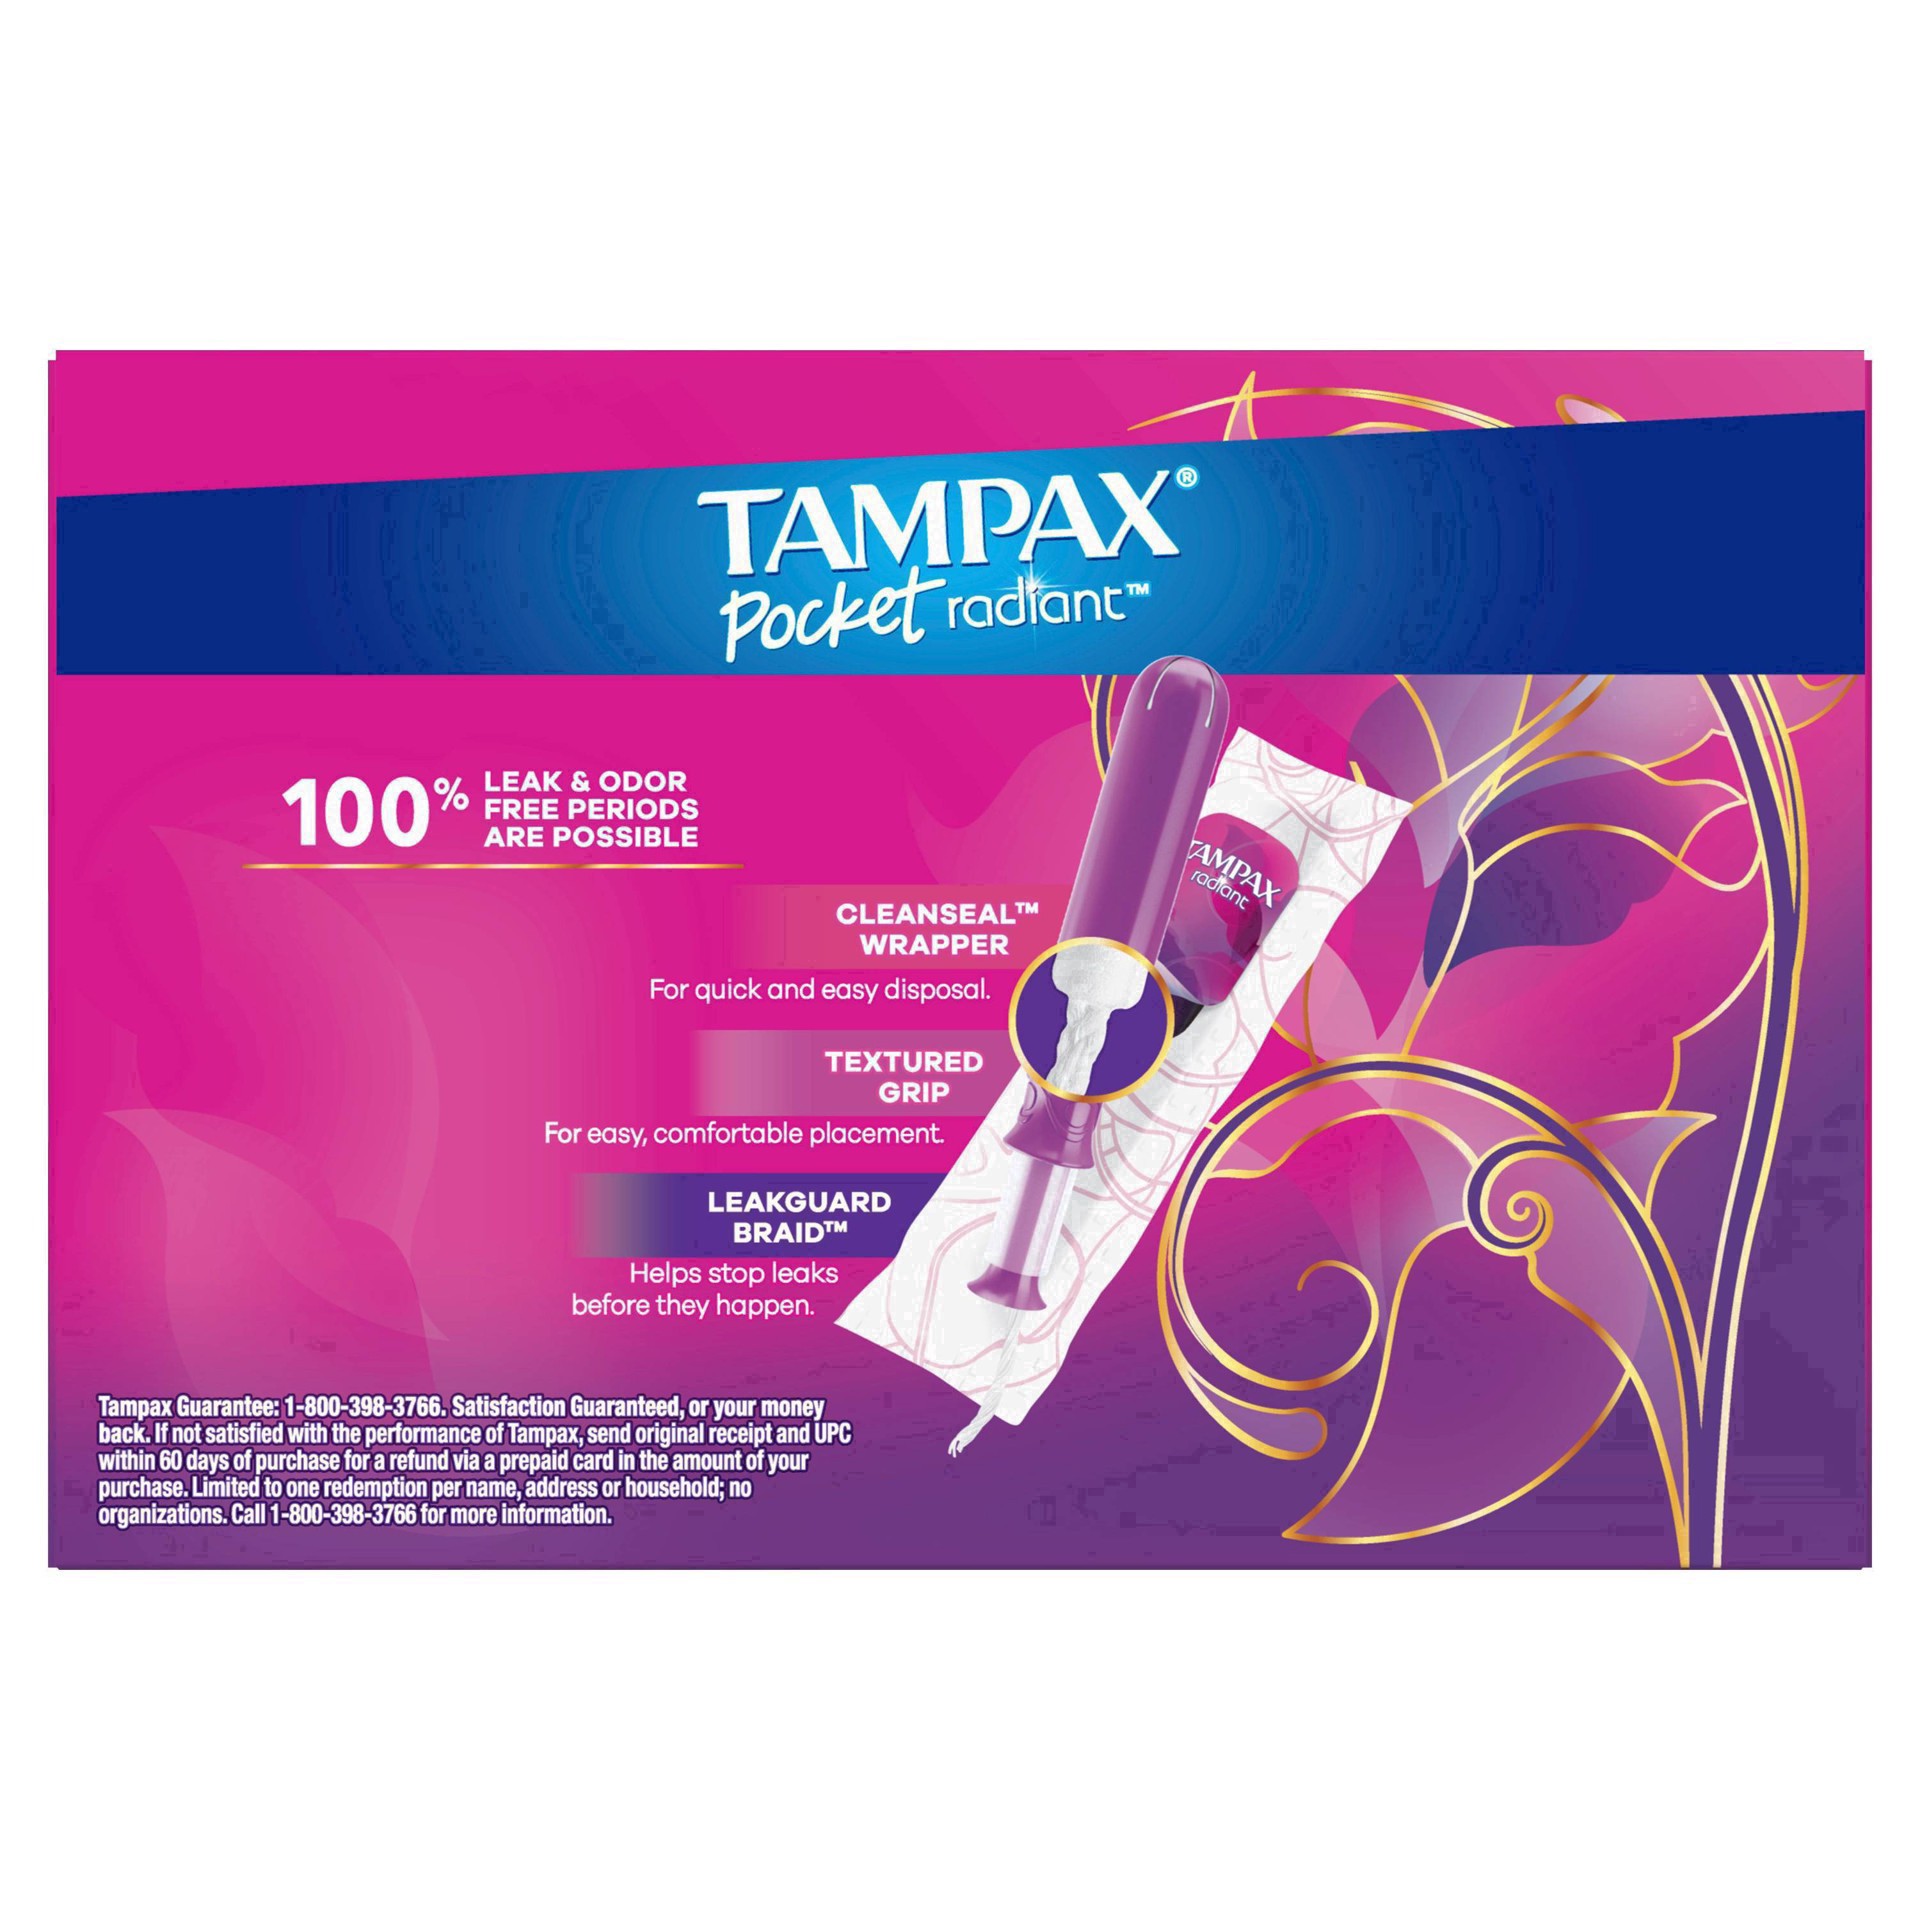 slide 75 of 94, Tampax Pocket Radiant Compact Plastic Tampons, With LeakGuard Braid, Super Absorbency, Unscented, 28 Count, 28 ct